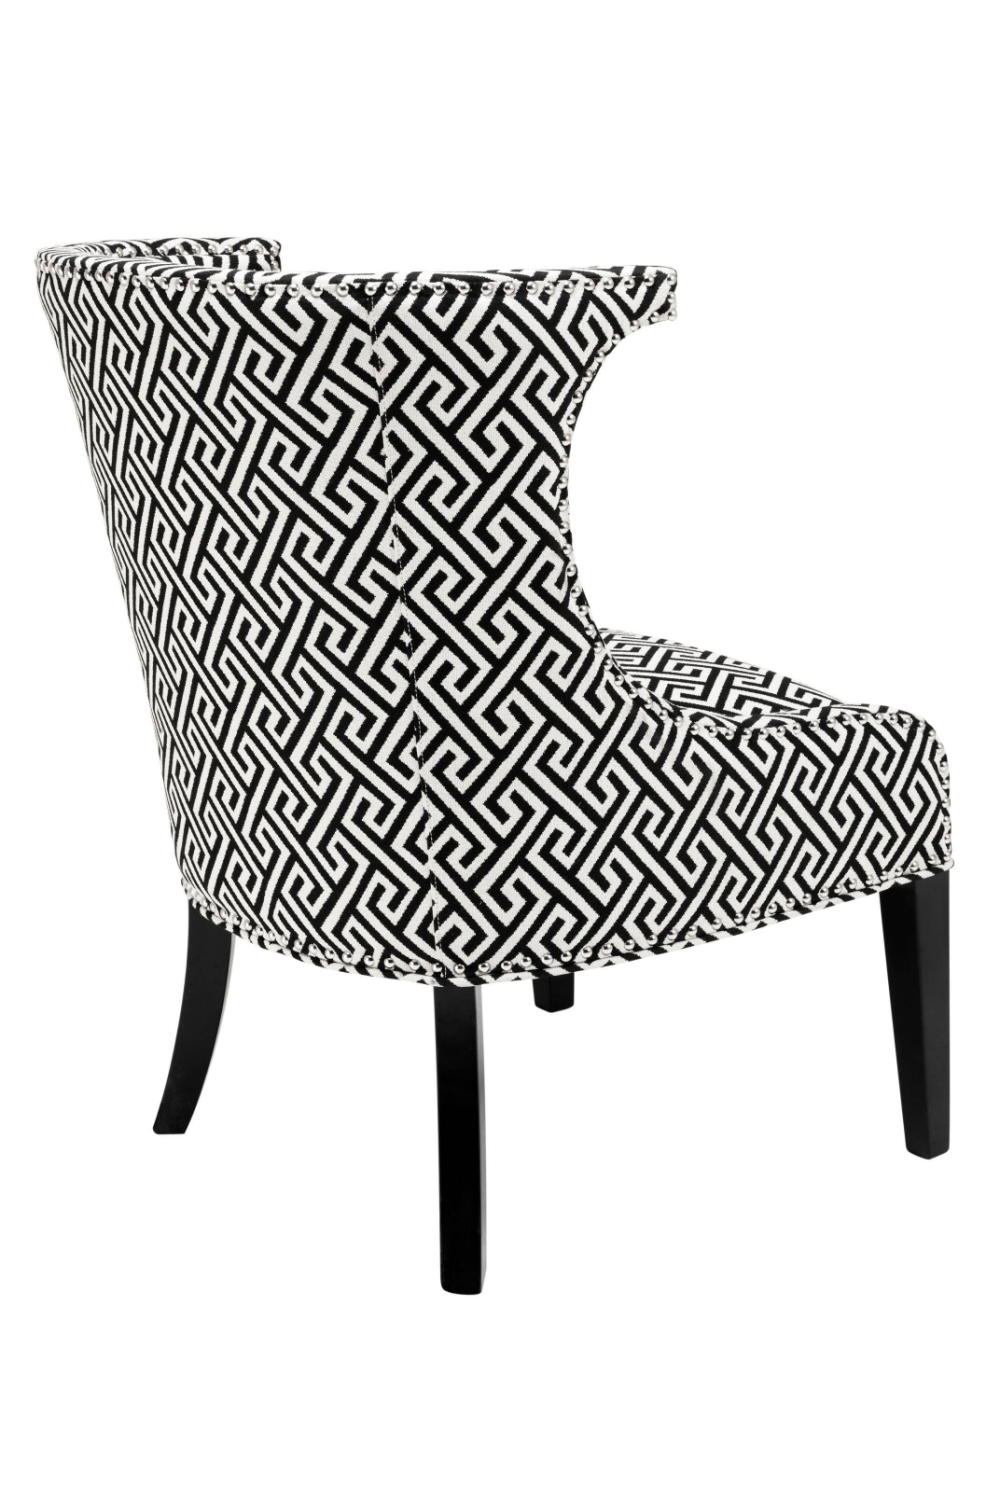 Modern Patterned Dining Chair | Eichholtz Elson | Oroa.com